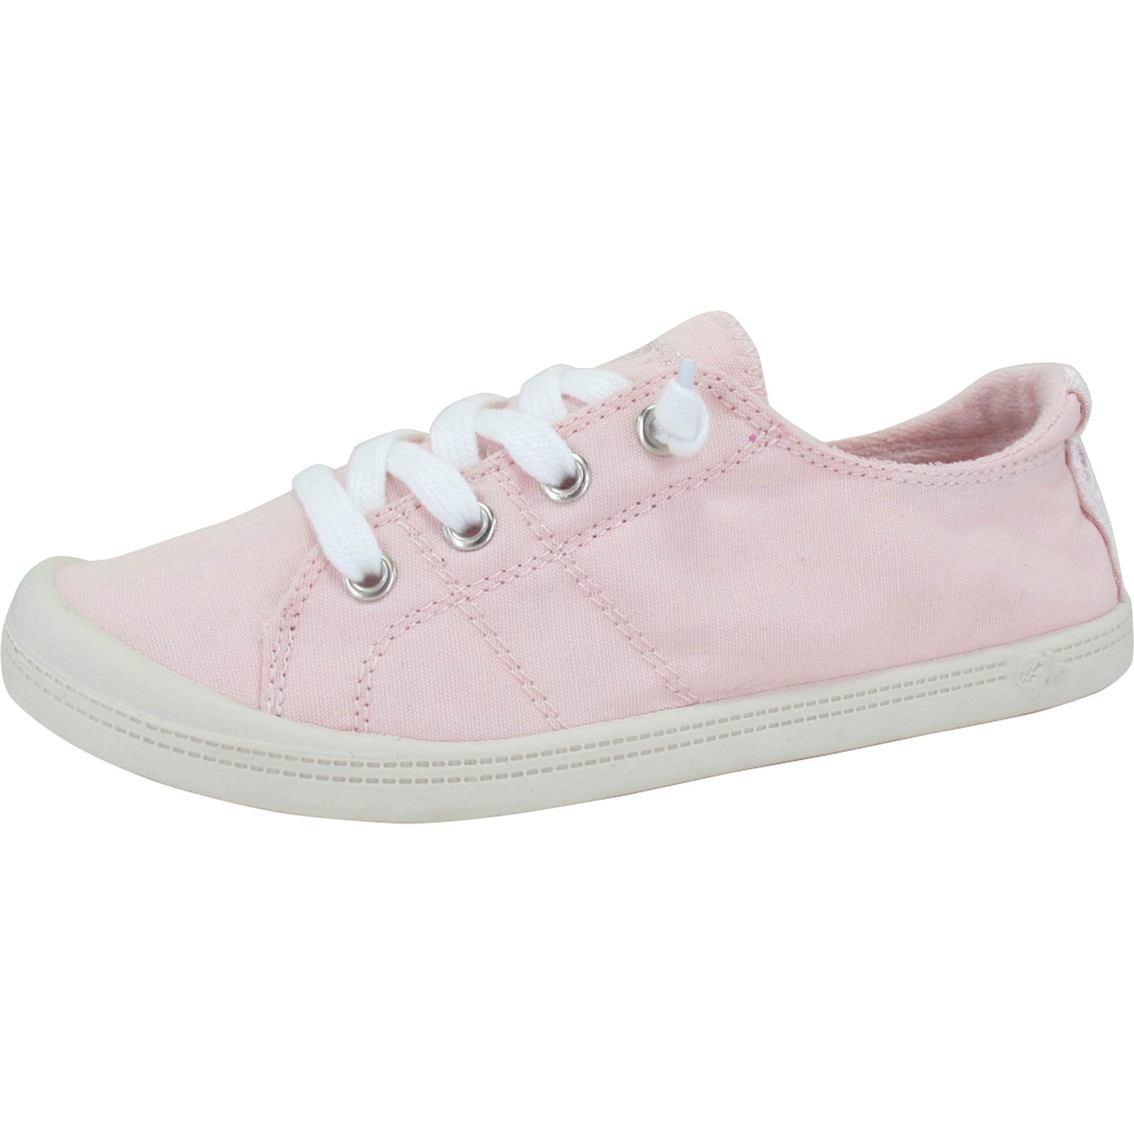 Jellypop Dallas Lace Up Sneakers | Sneakers | Shoes | Shop The Exchange